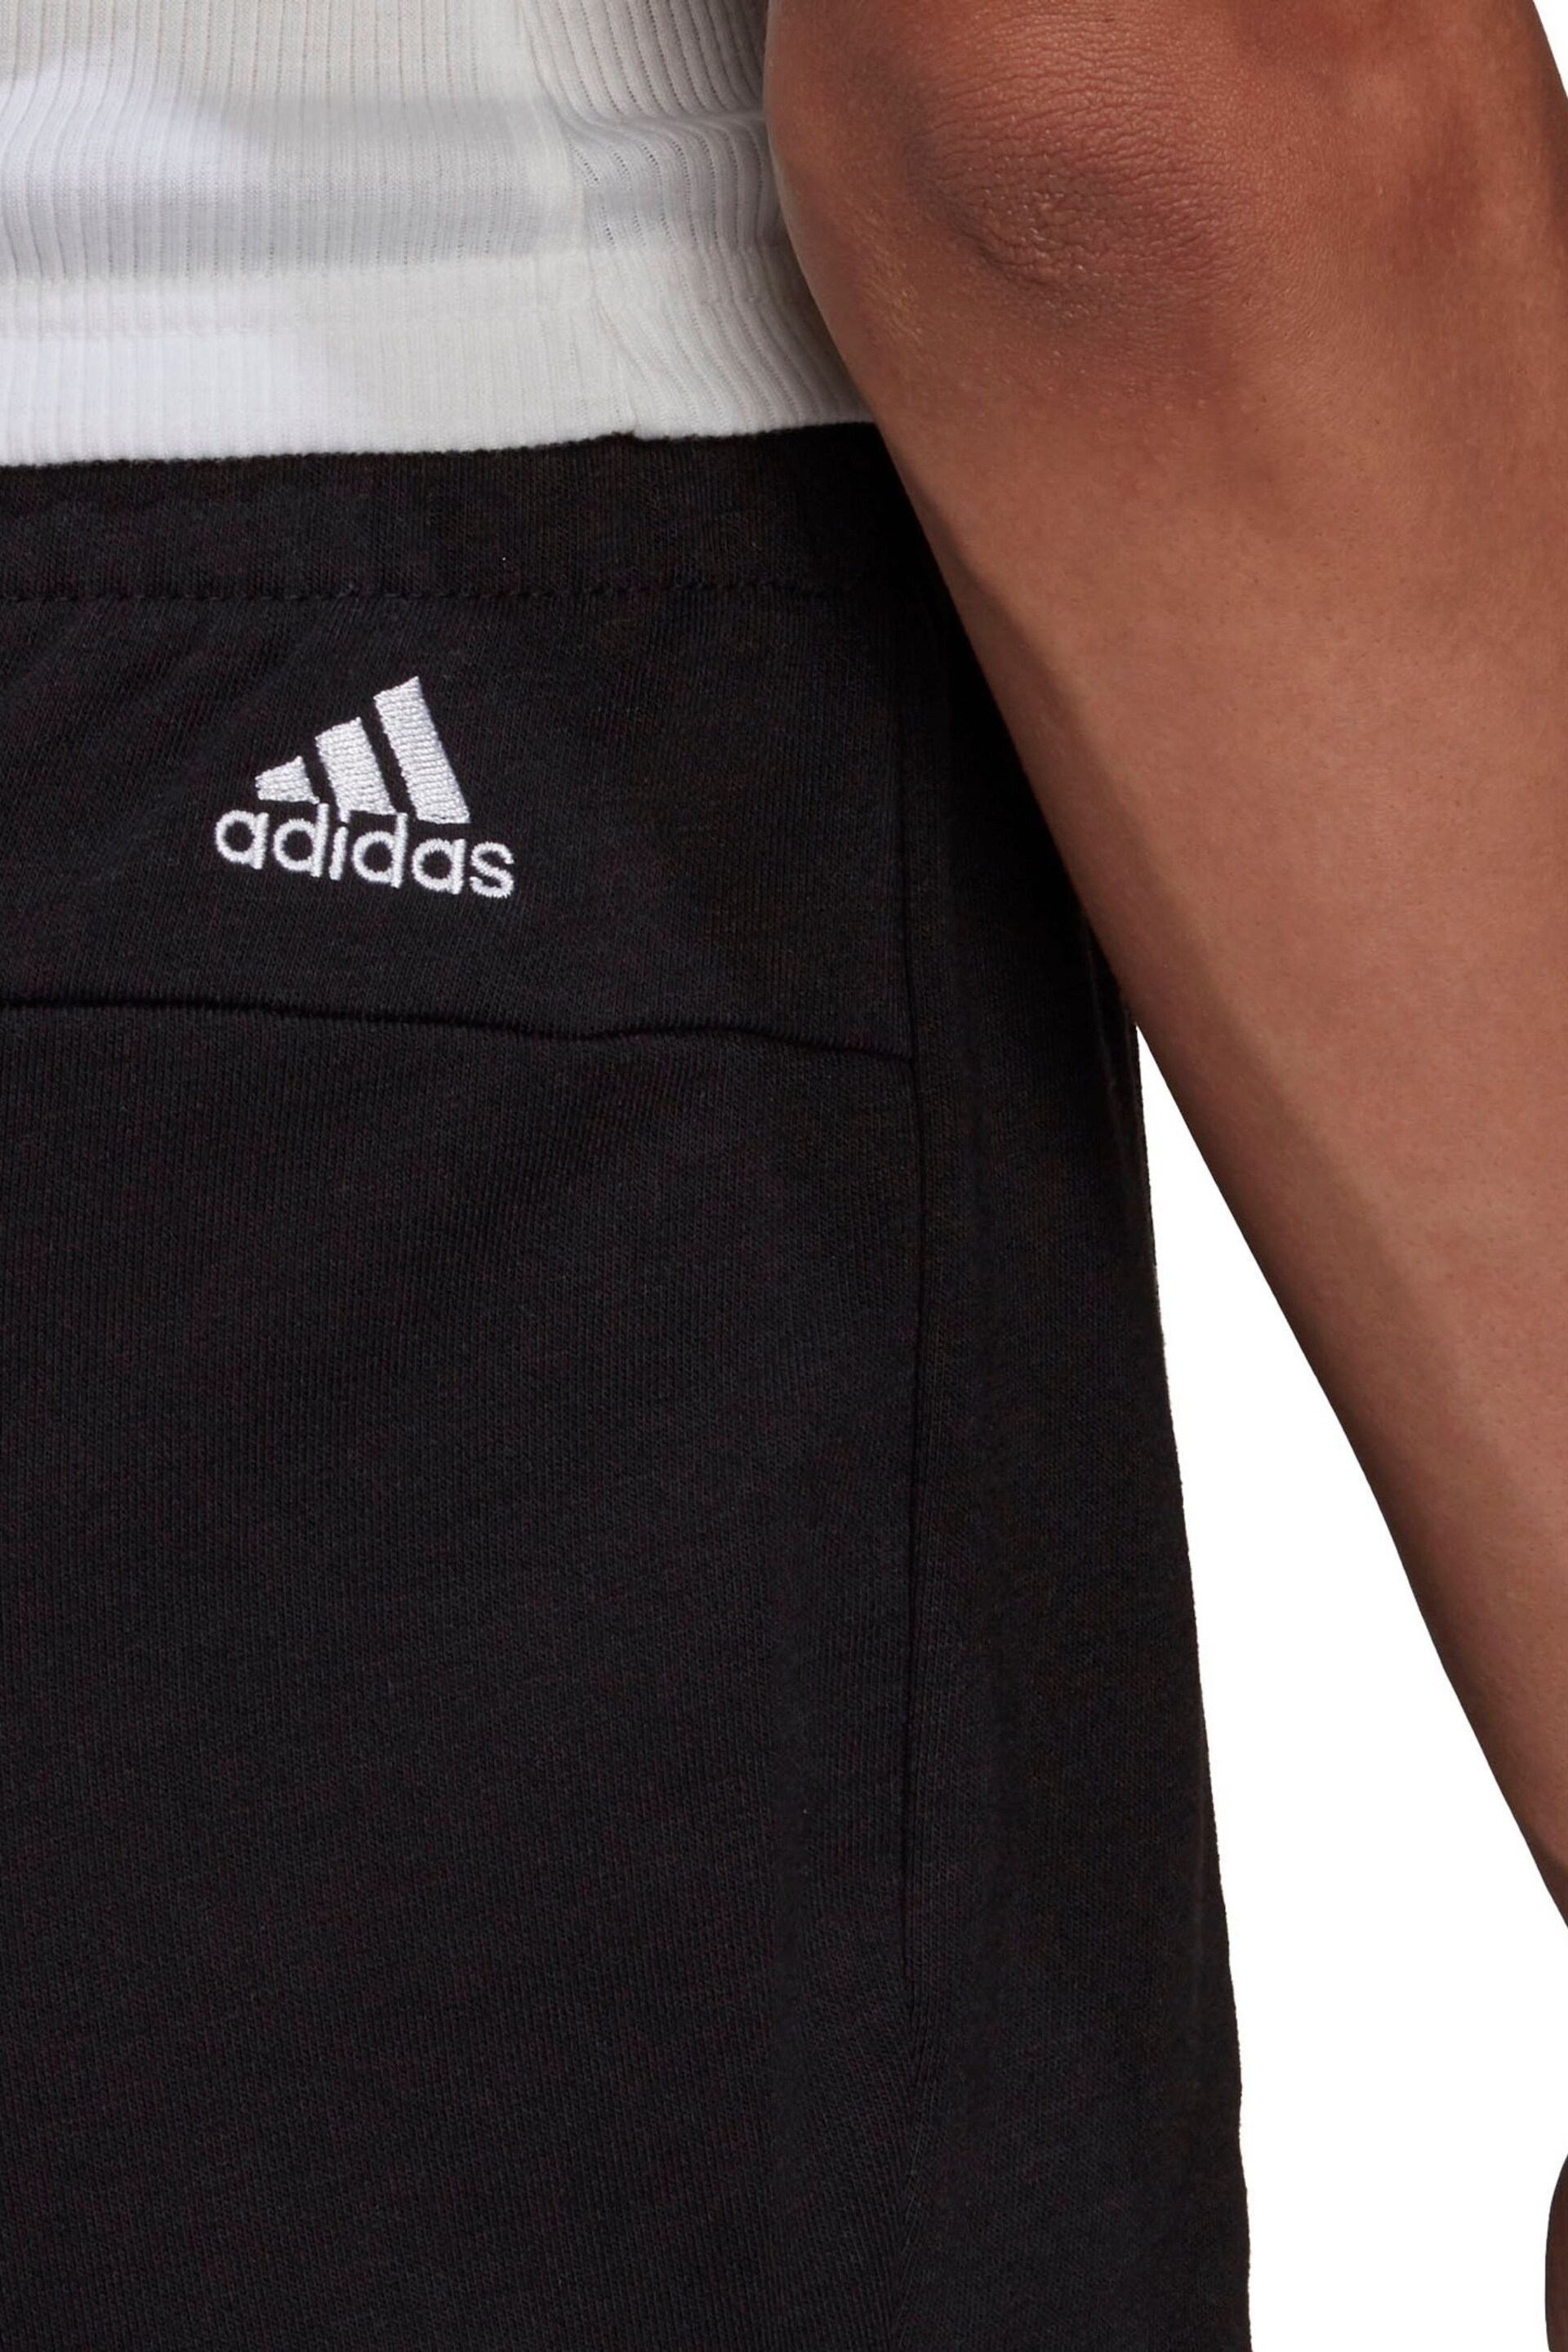 adidas Black Sportswear Essentials Linear French Terry Shorts - Image 4 of 6